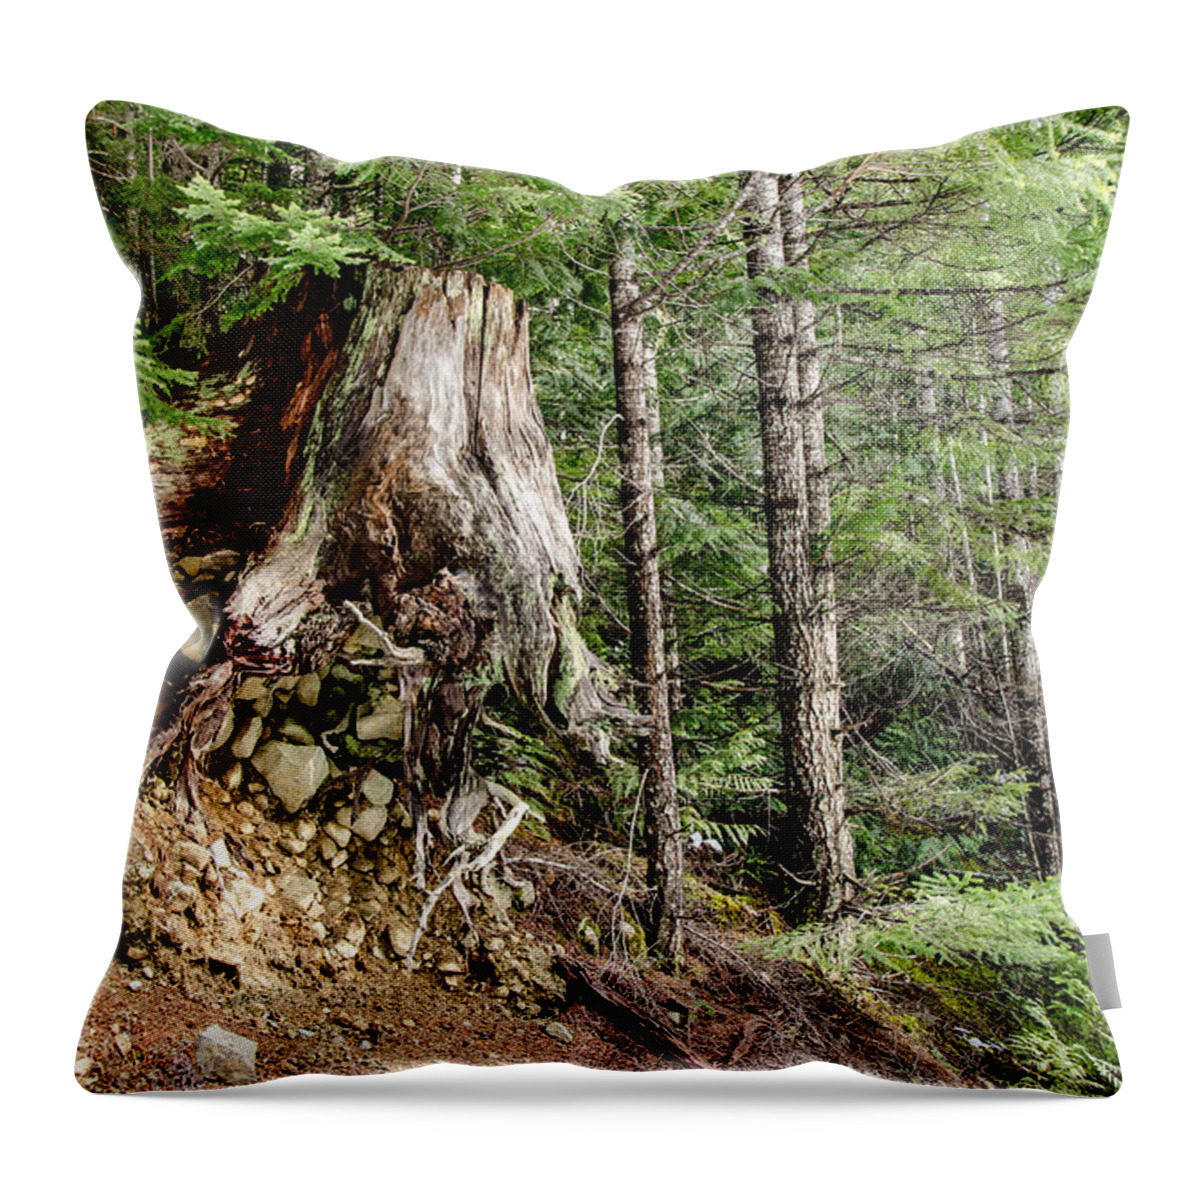 Backroad Throw Pillow featuring the photograph Just Hanging On Old Growth Forest Stump by Roxy Hurtubise